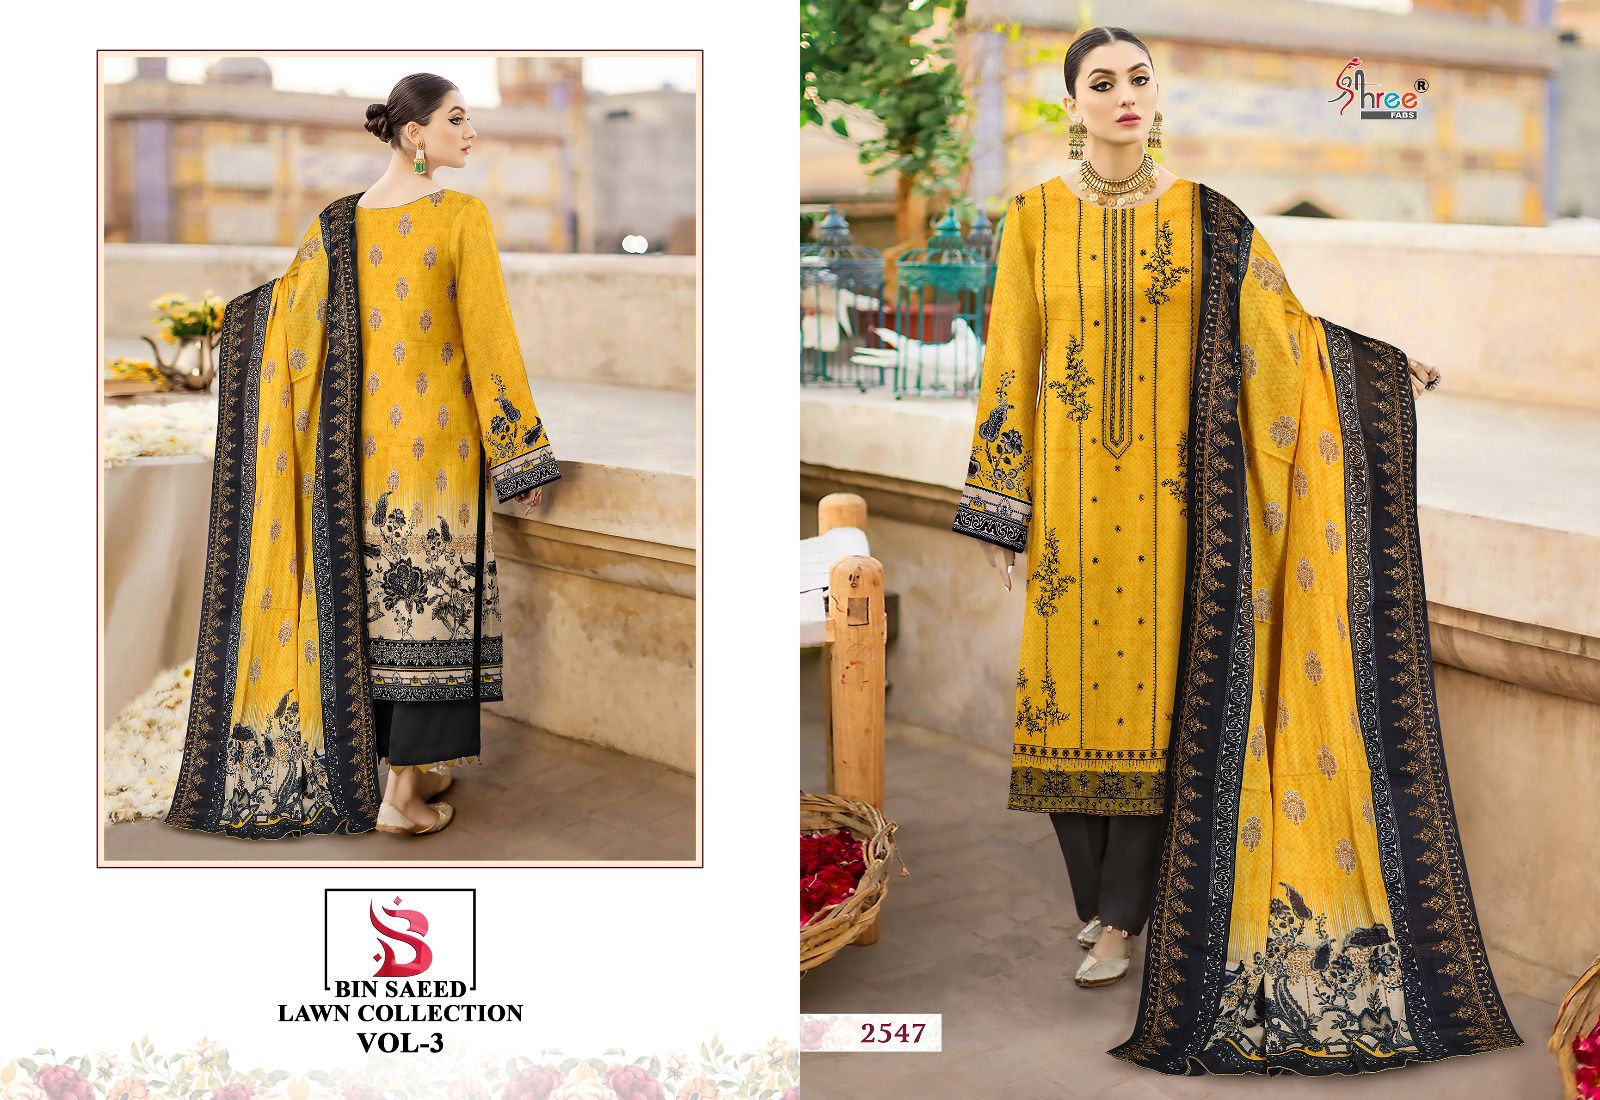 Shree Bin Saeed Lawn Collection Vol 3 collection 1